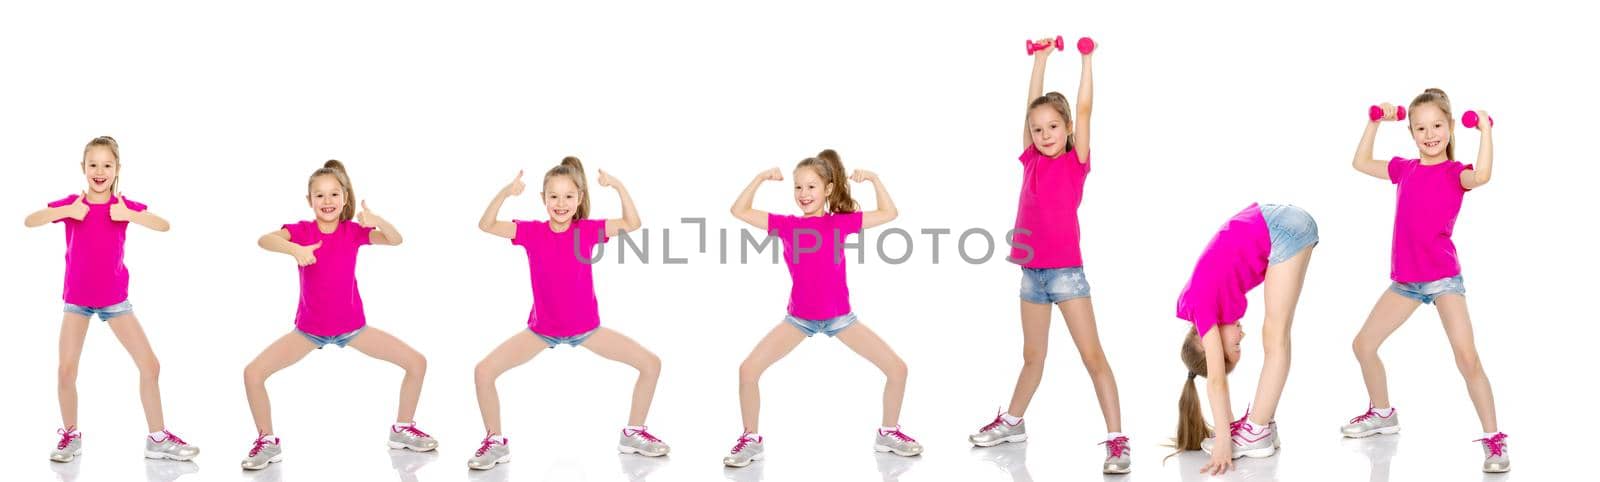 Beautiful little girl shows her muscles. The concept of strength, health and sport. Isolated on white background.